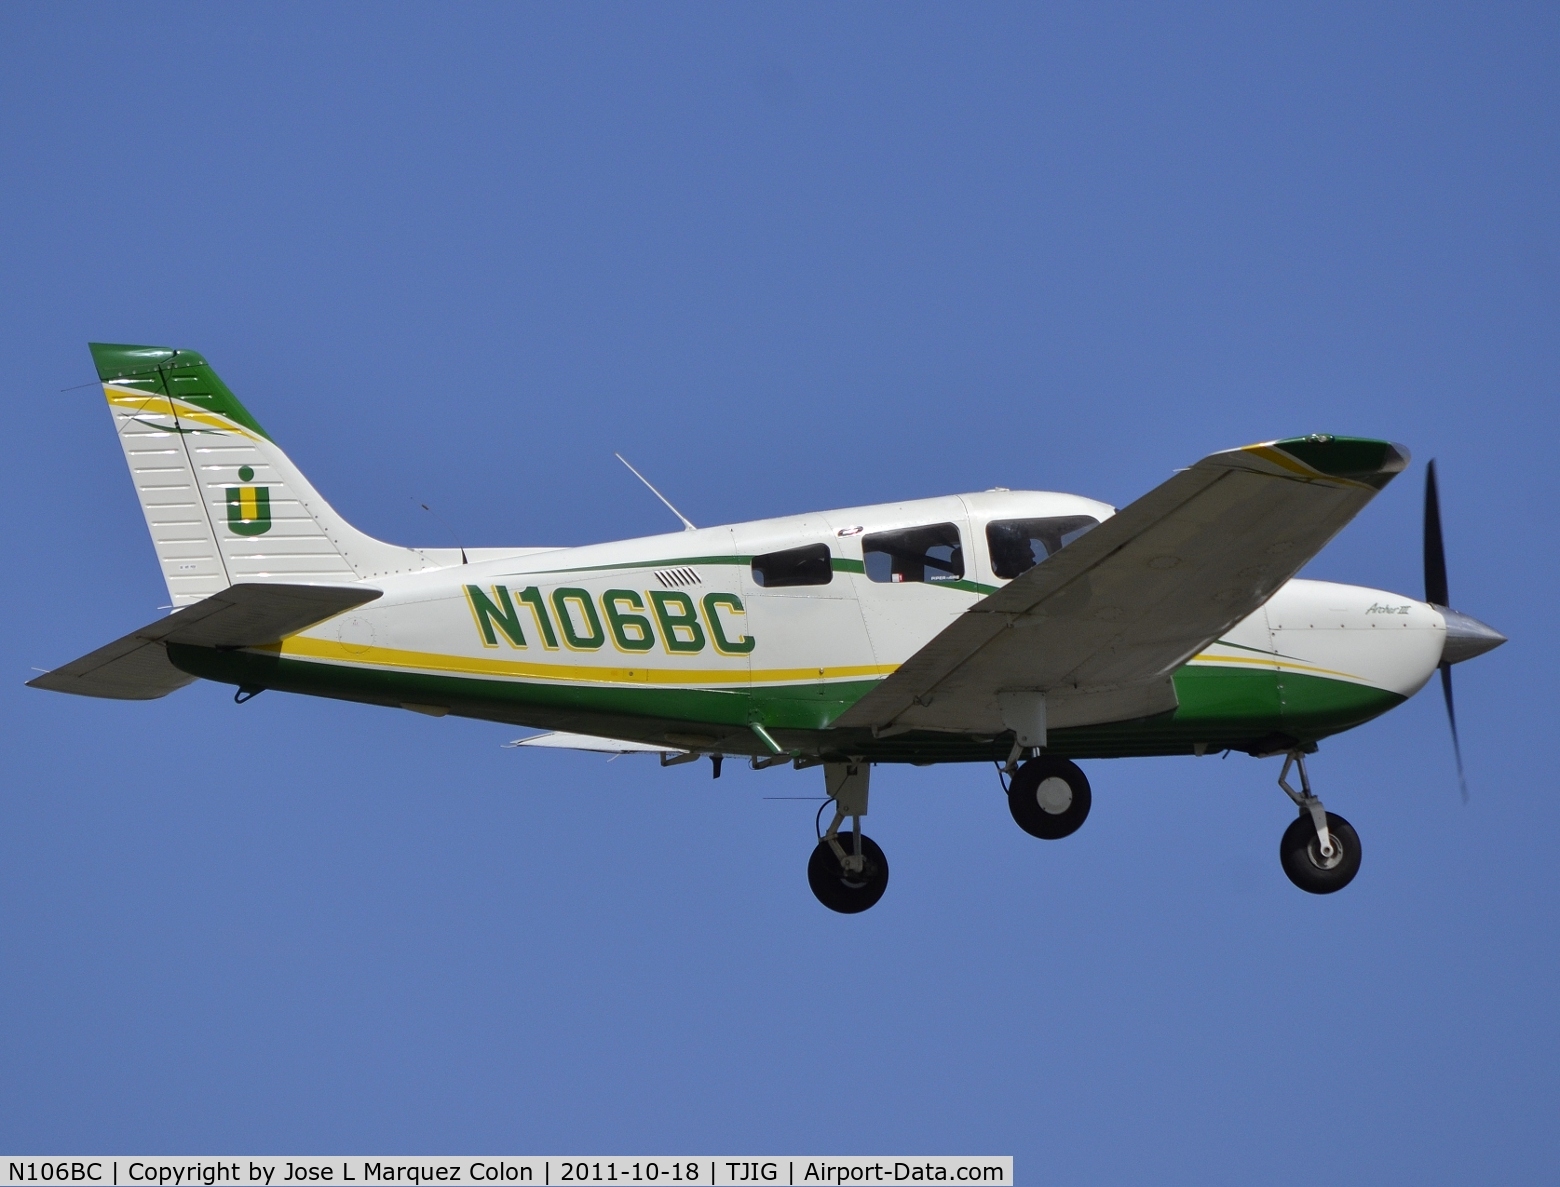 N106BC, 2003 Piper PA-28-181 C/N 2843582, My First SOLO Flight.